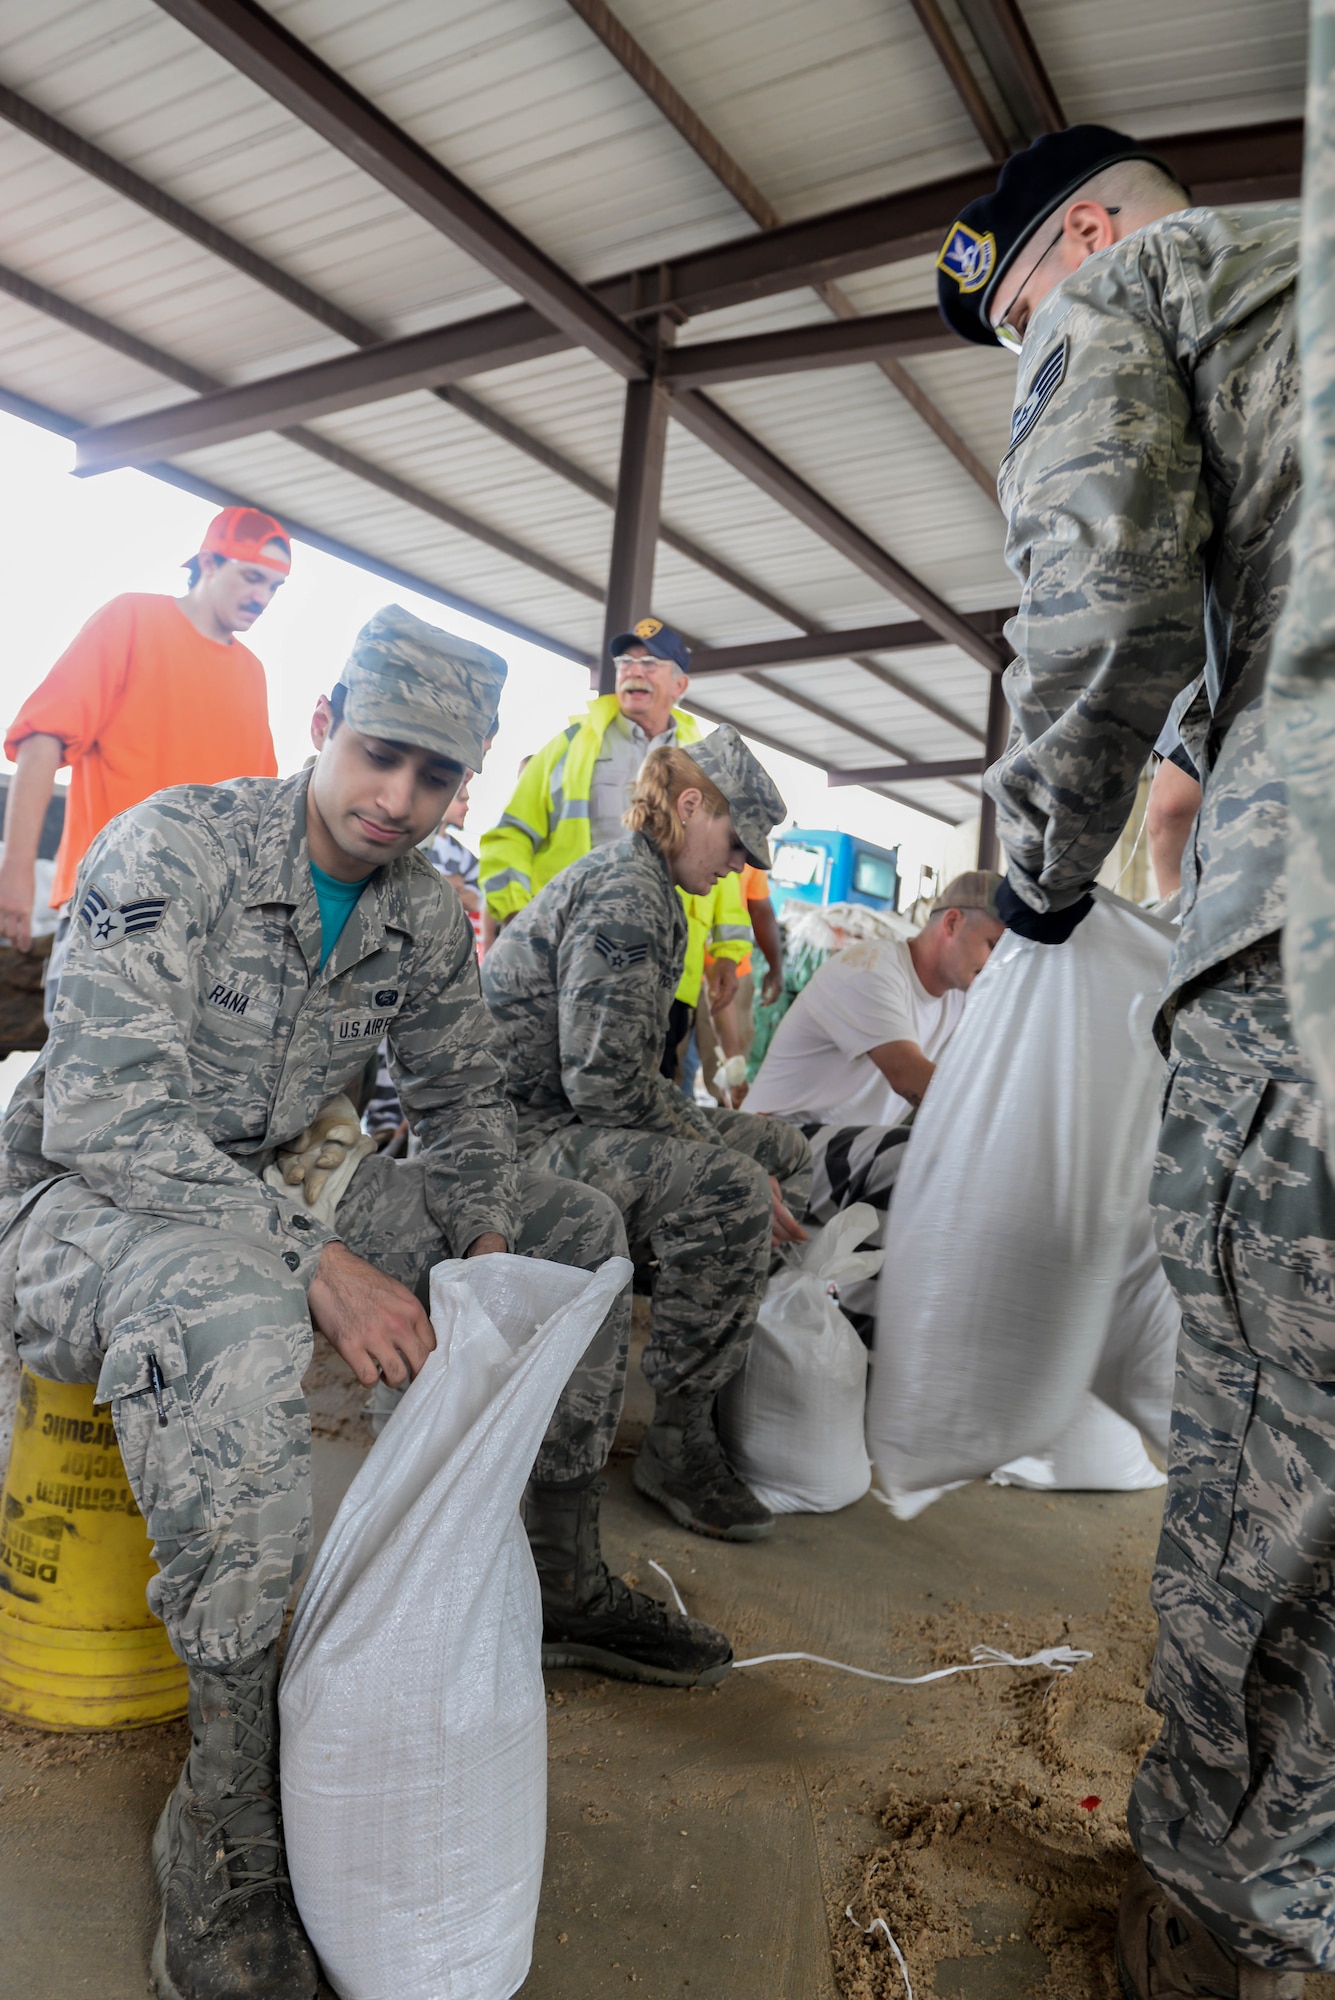 Barksdale Airmen fill sandbags in Bossier City, La., March 11, 2016. The sandbags were both used for infrastructure protection and home protection. The bags were made available to local residents in a variety of locations throughout Bossier City. (U.S. Air Force photo/Senior Airman Mozer O. Da Cunha)